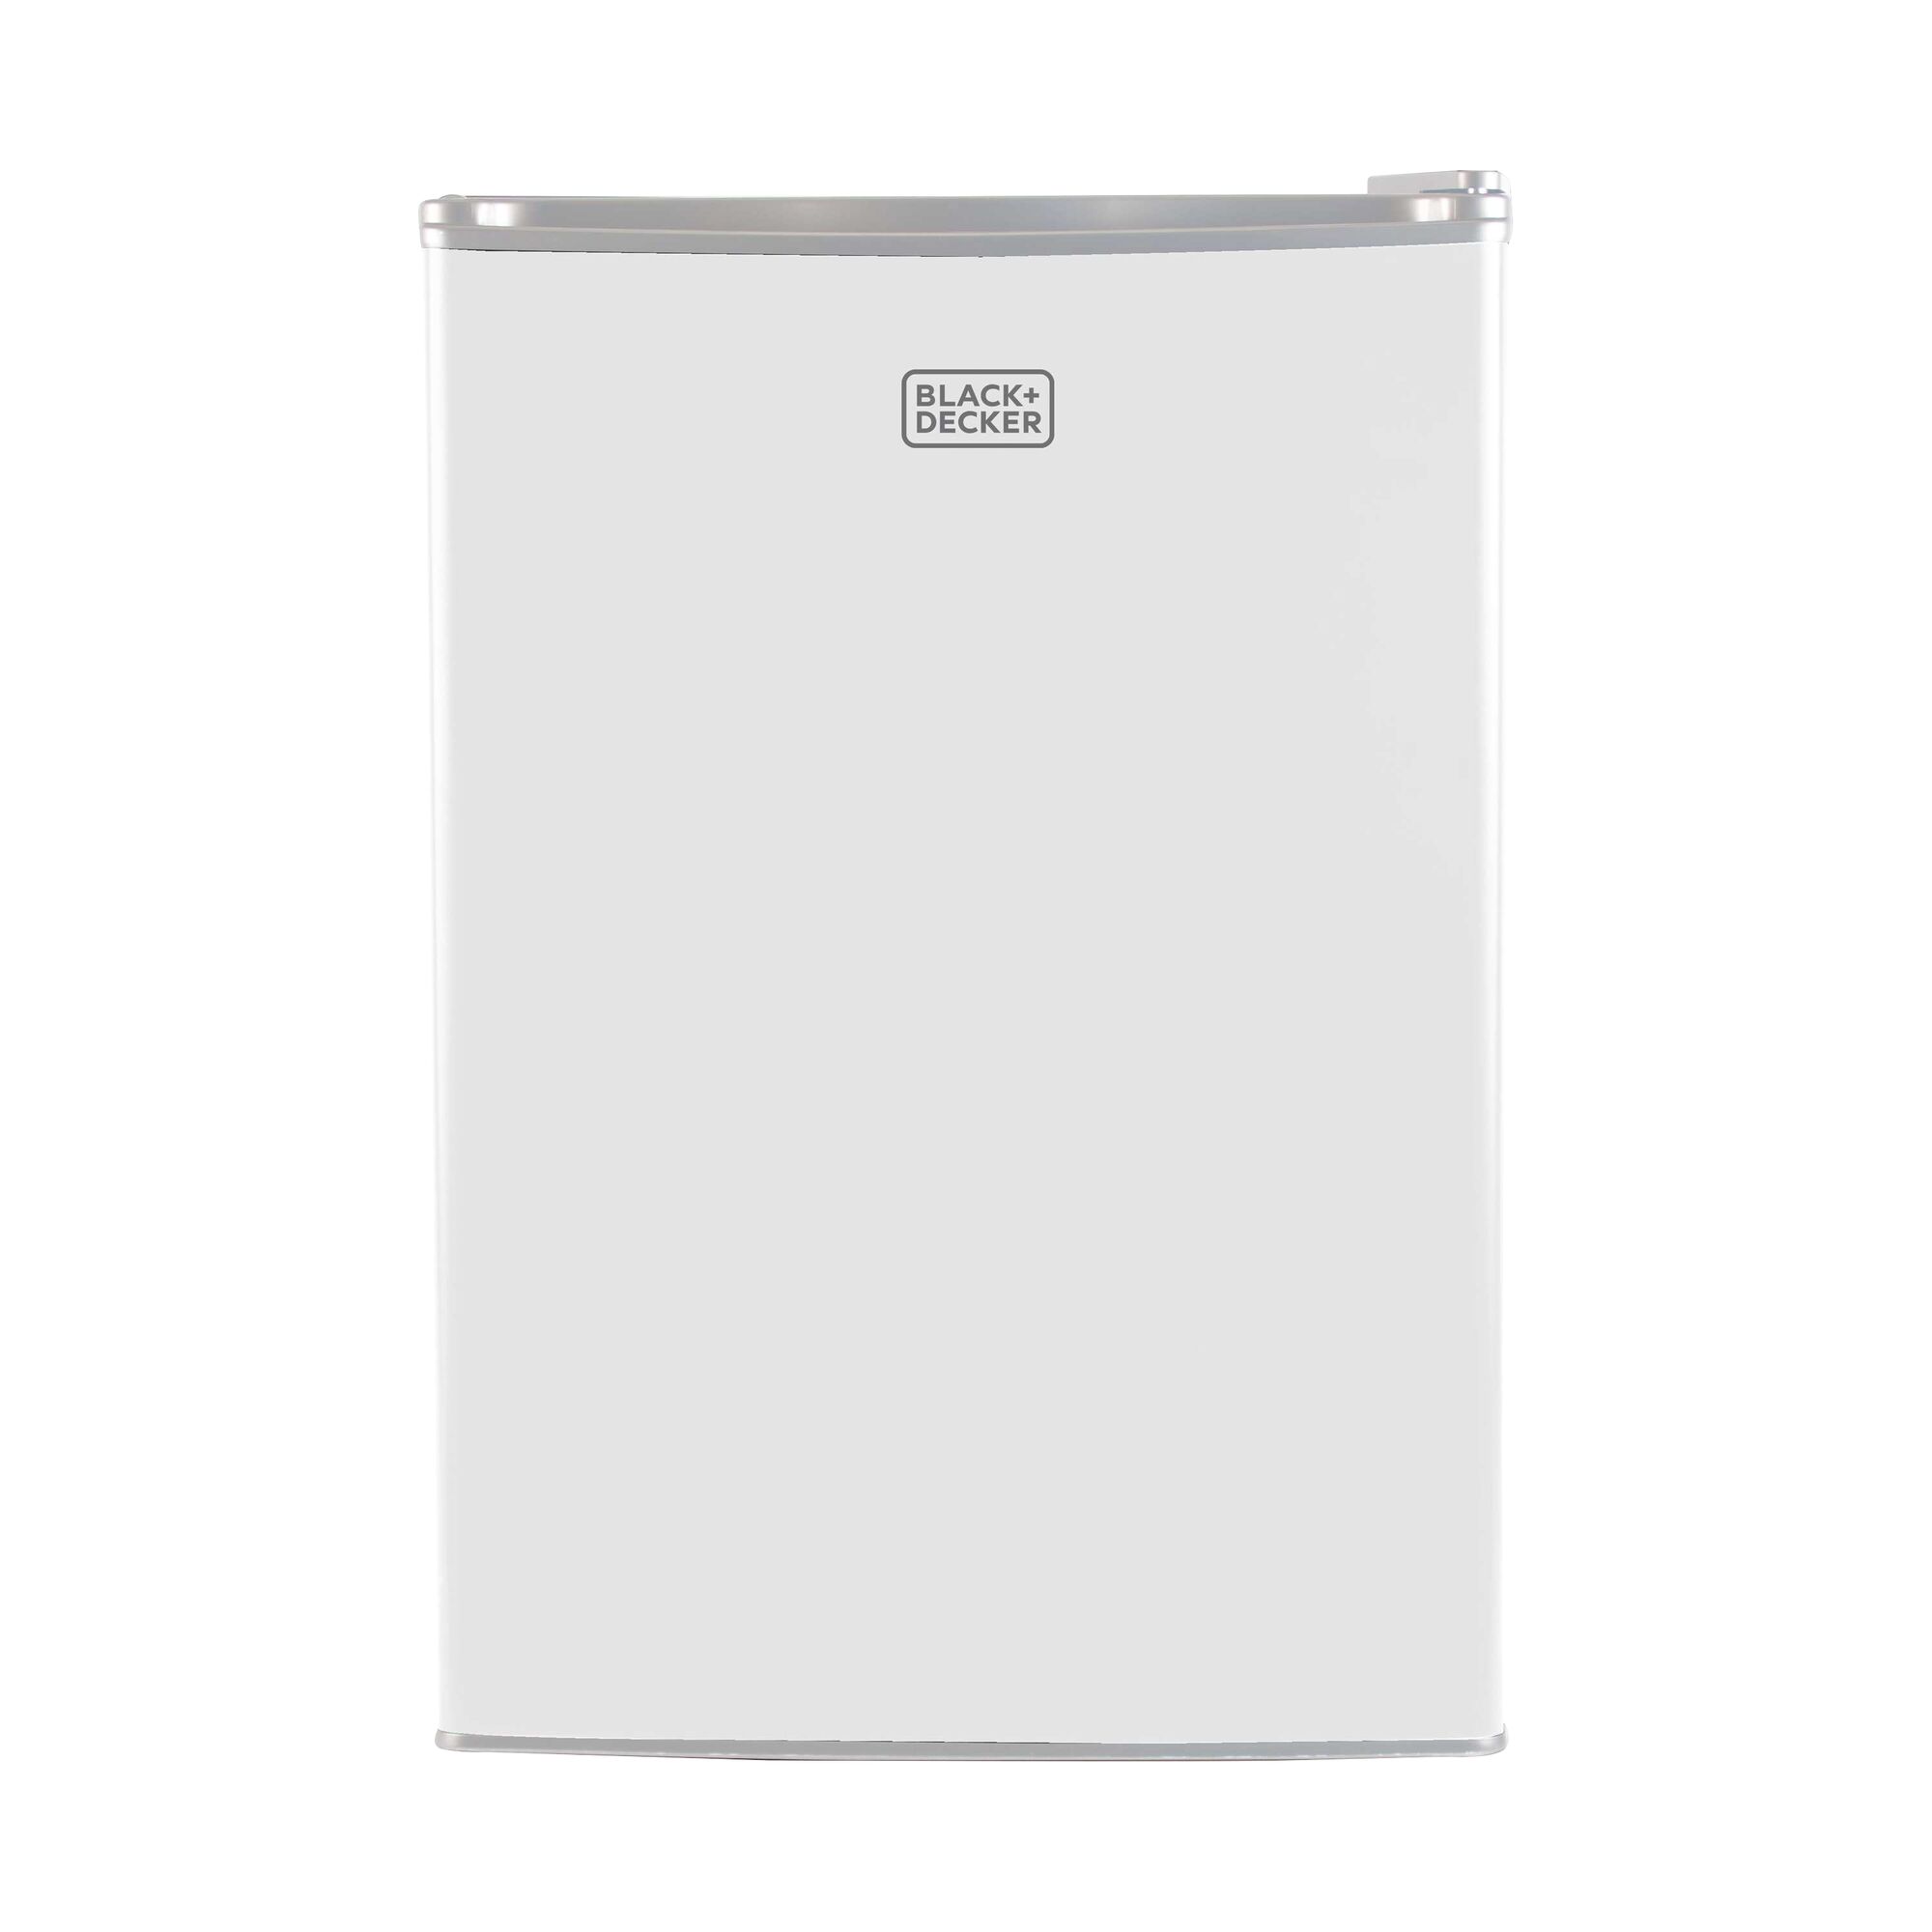 Profile of 2.5 cubic feet energy star white refrigerator with freezer.